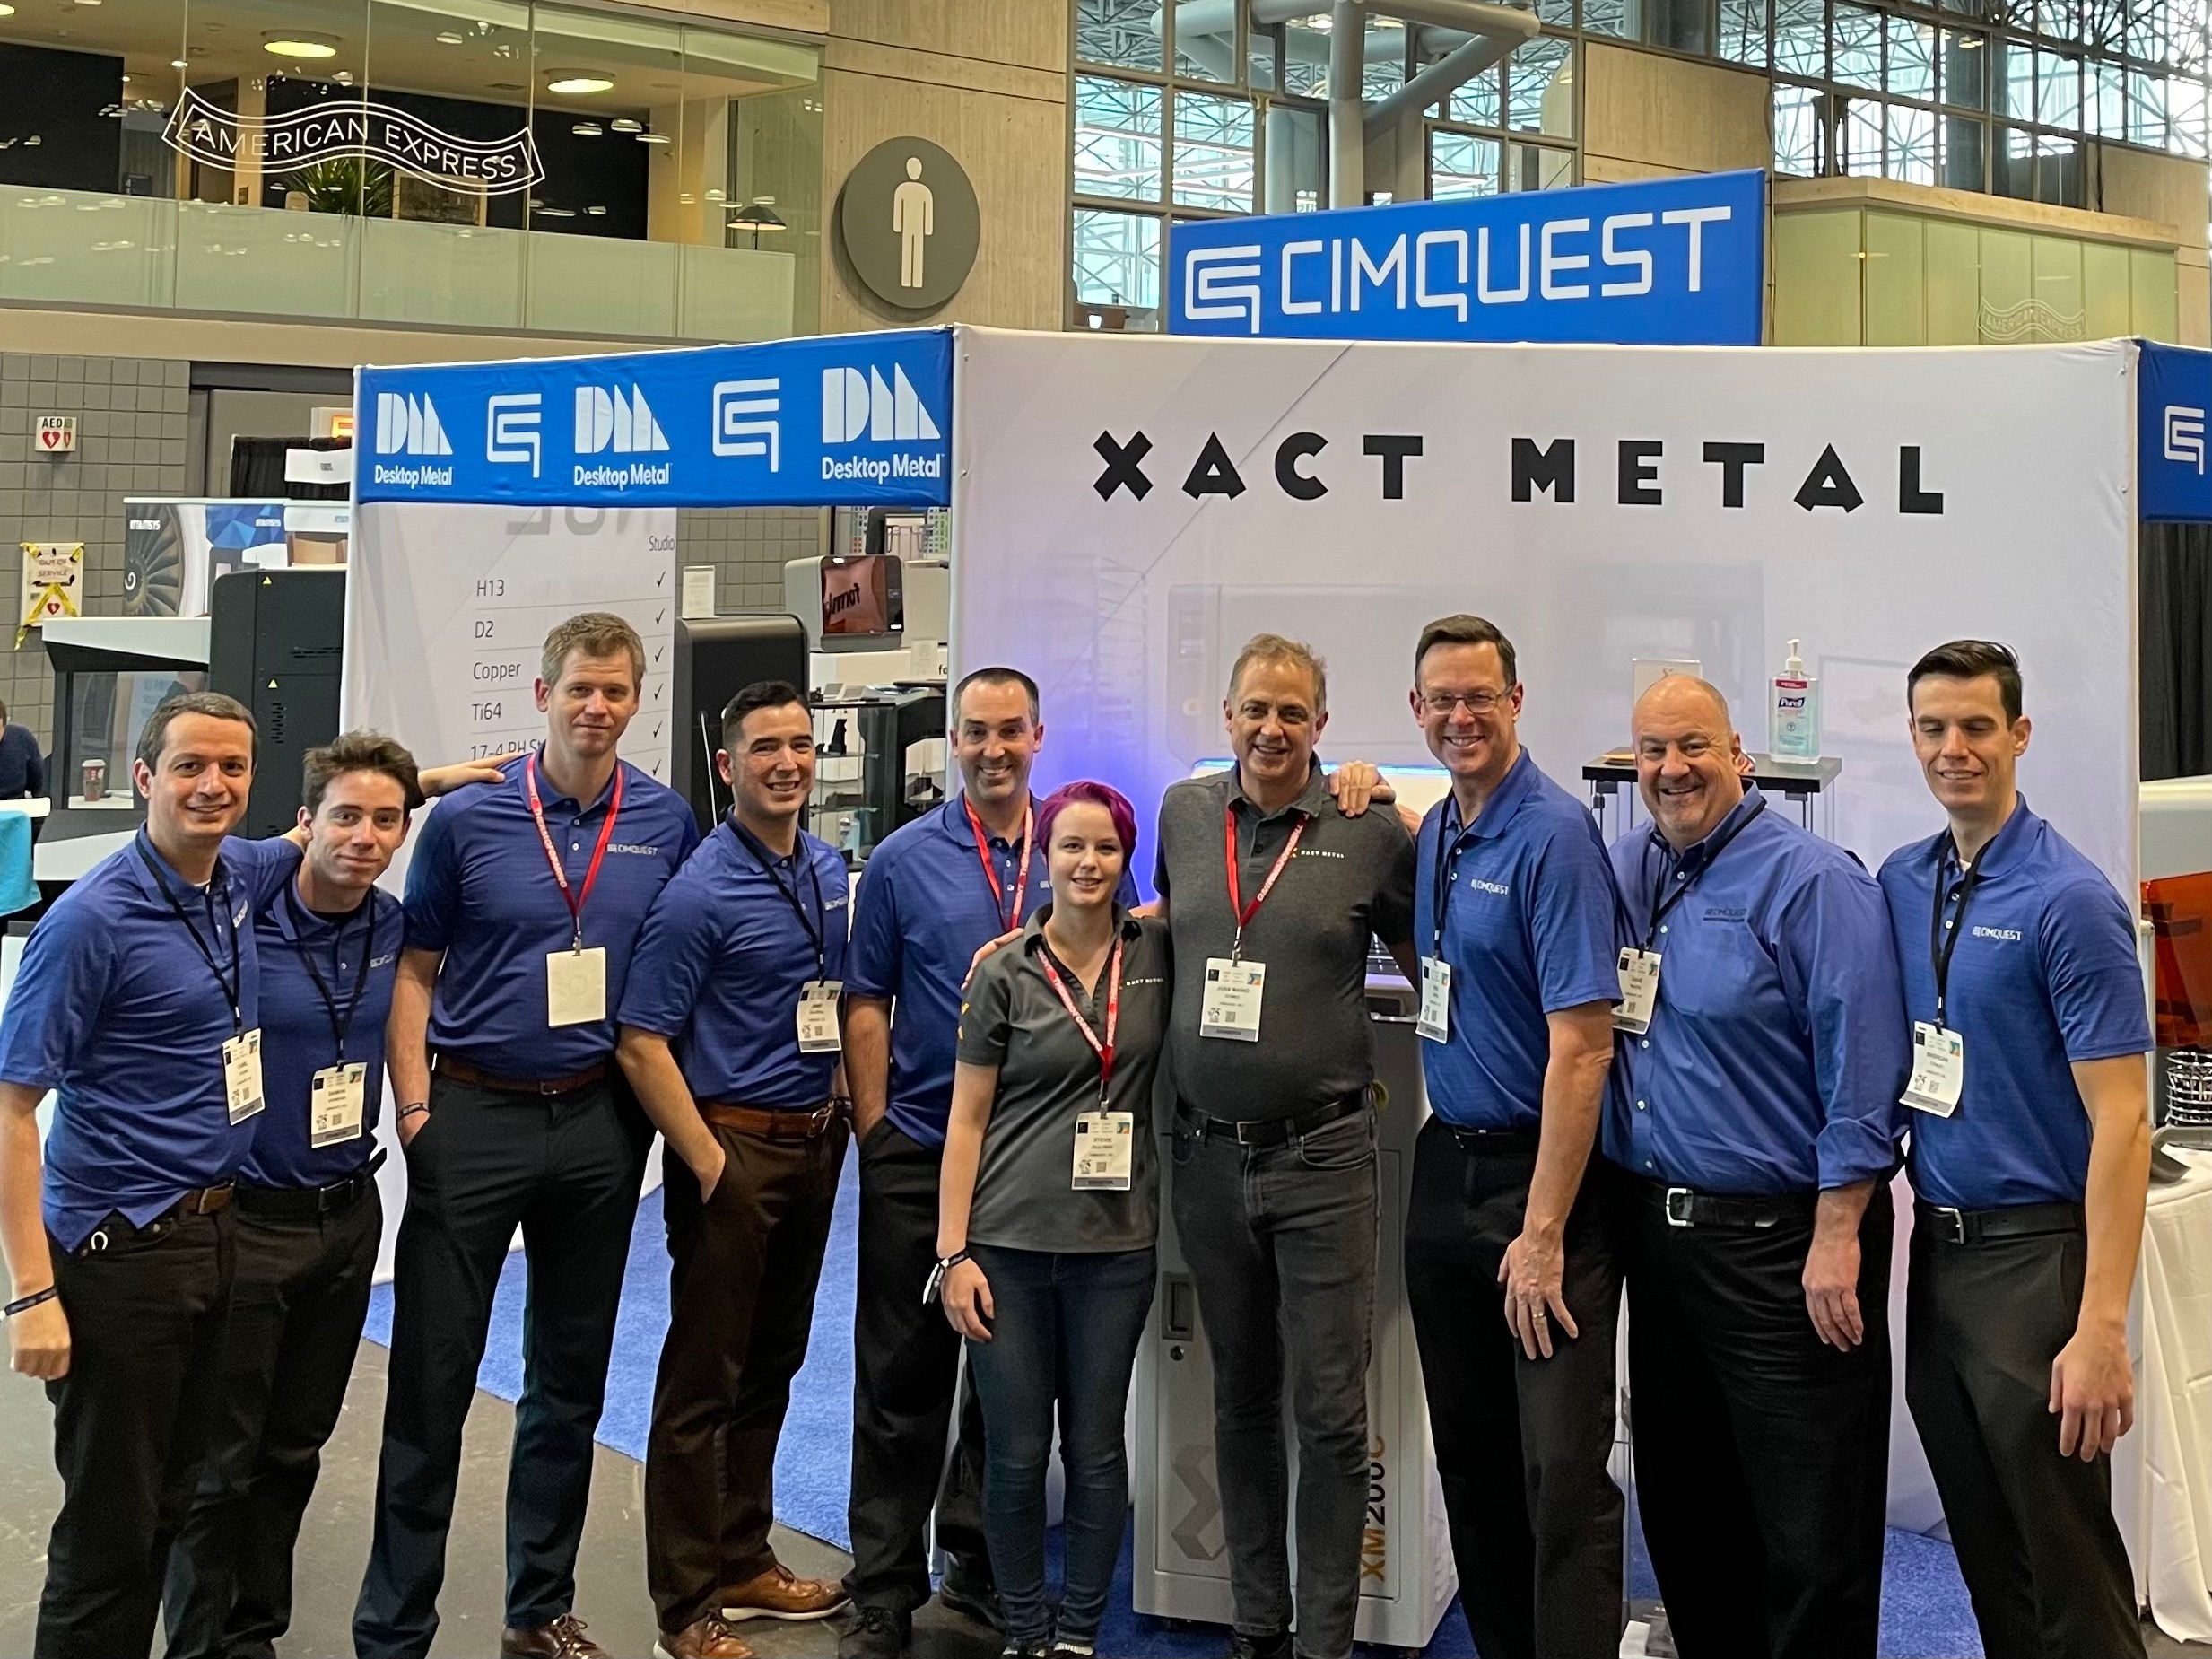 Xact Metal with sales partner in affordable metal 3D printing, Cimquest, Inc.